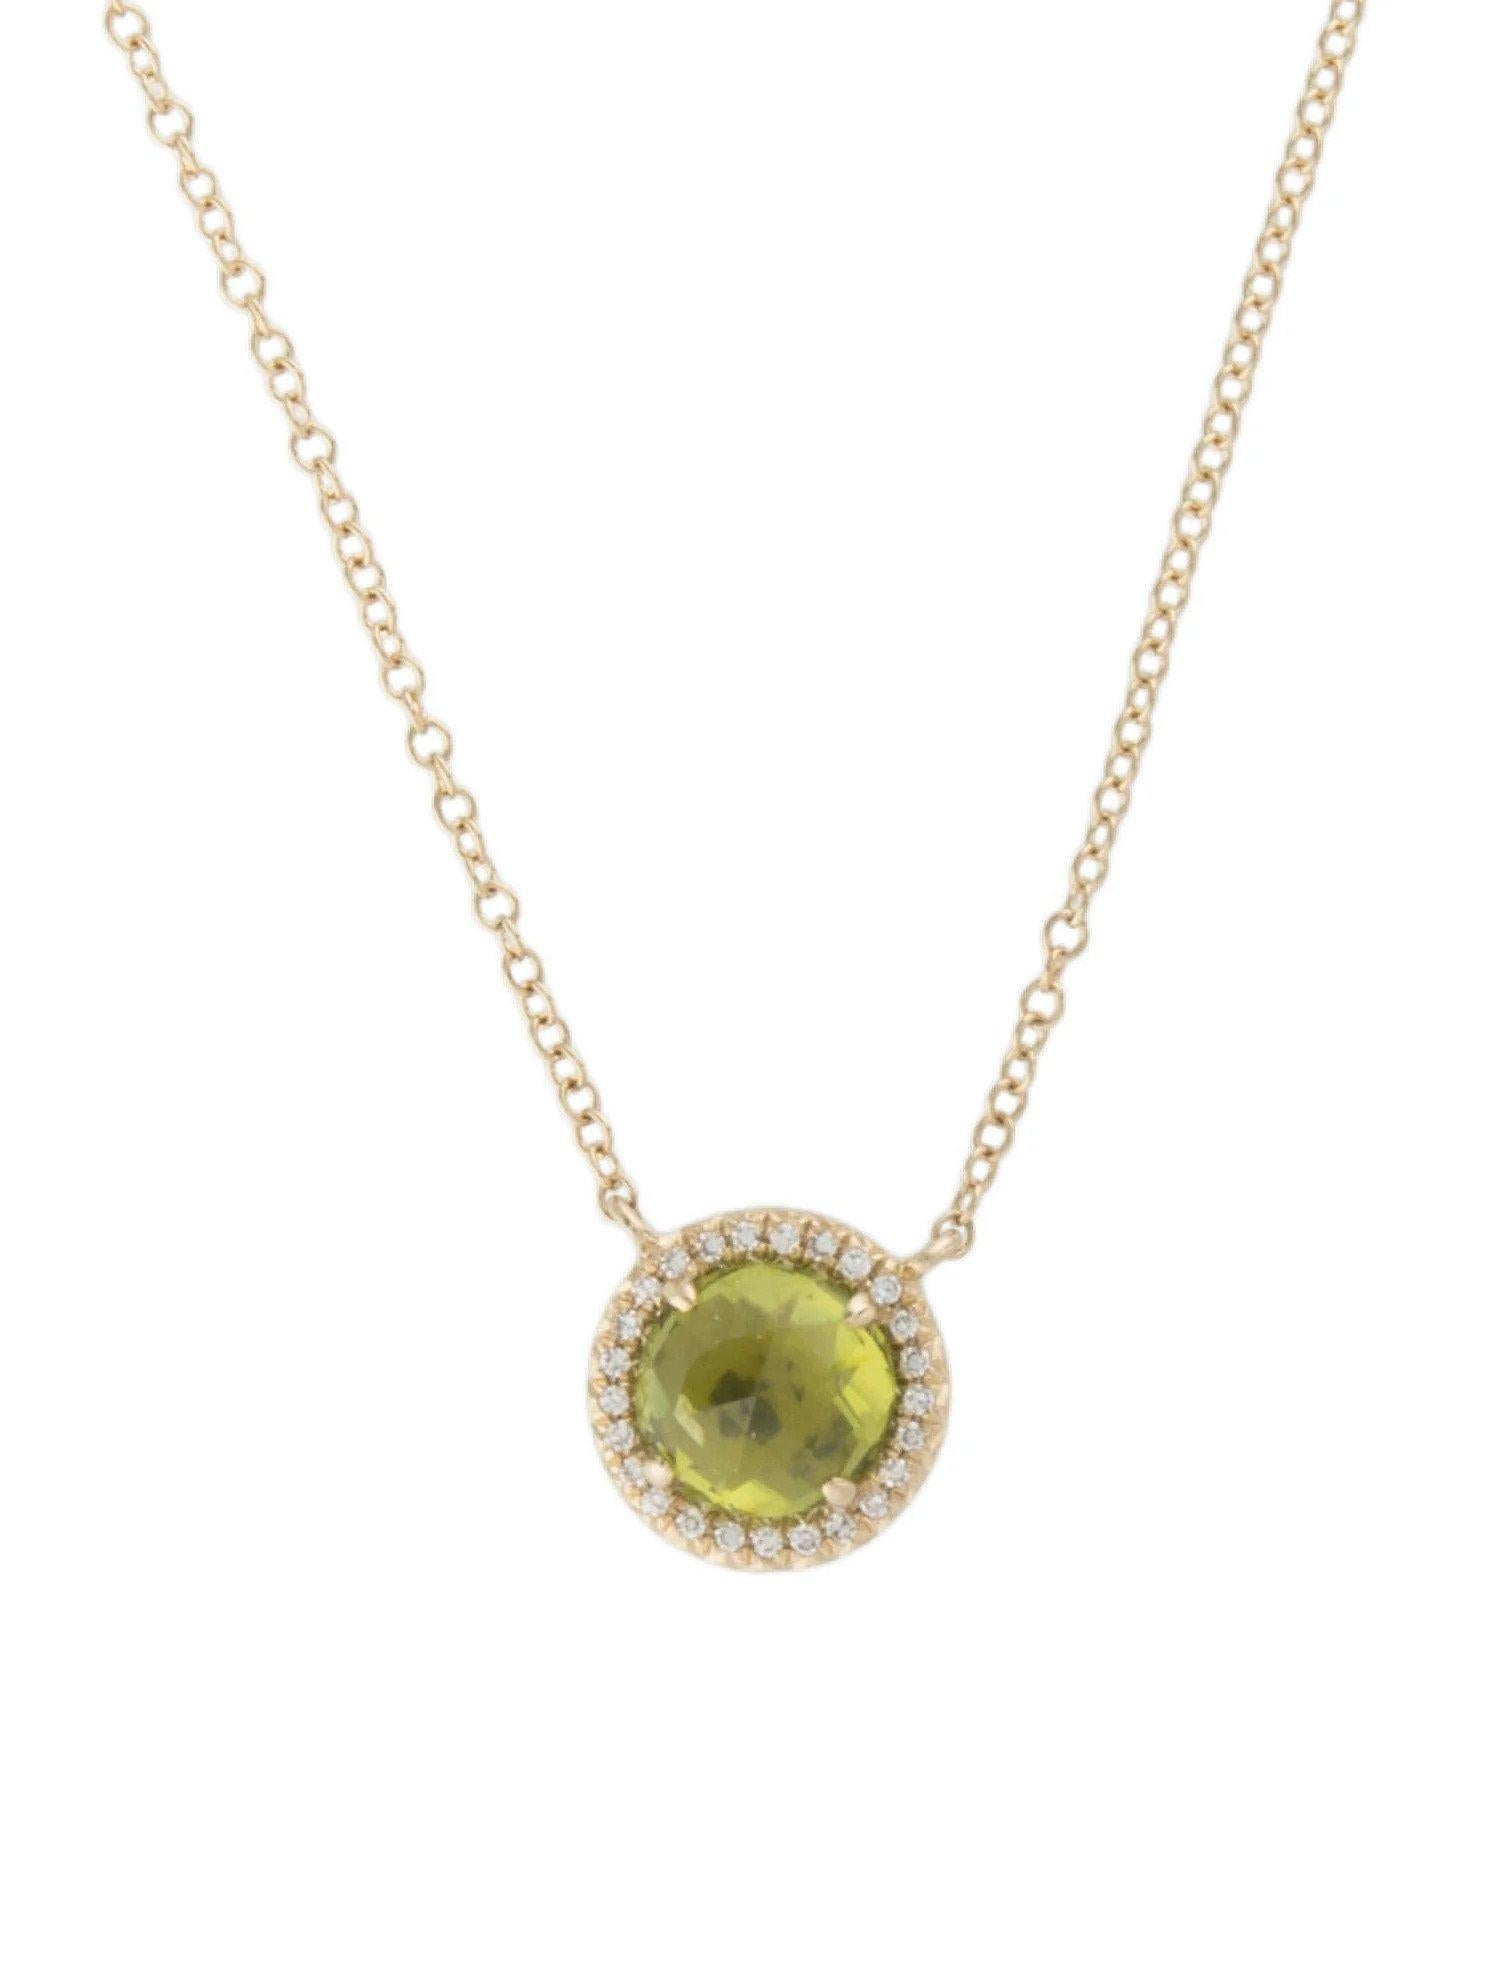 This Peridot & Diamond Pendant is a stunning and timeless accessory that can add a touch of glamour and sophistication to any outfit. 

This pendant features a 1.20 Carat Round Peridot, with a Diamond Halo comprised of 0.06 Carats of Single Cut